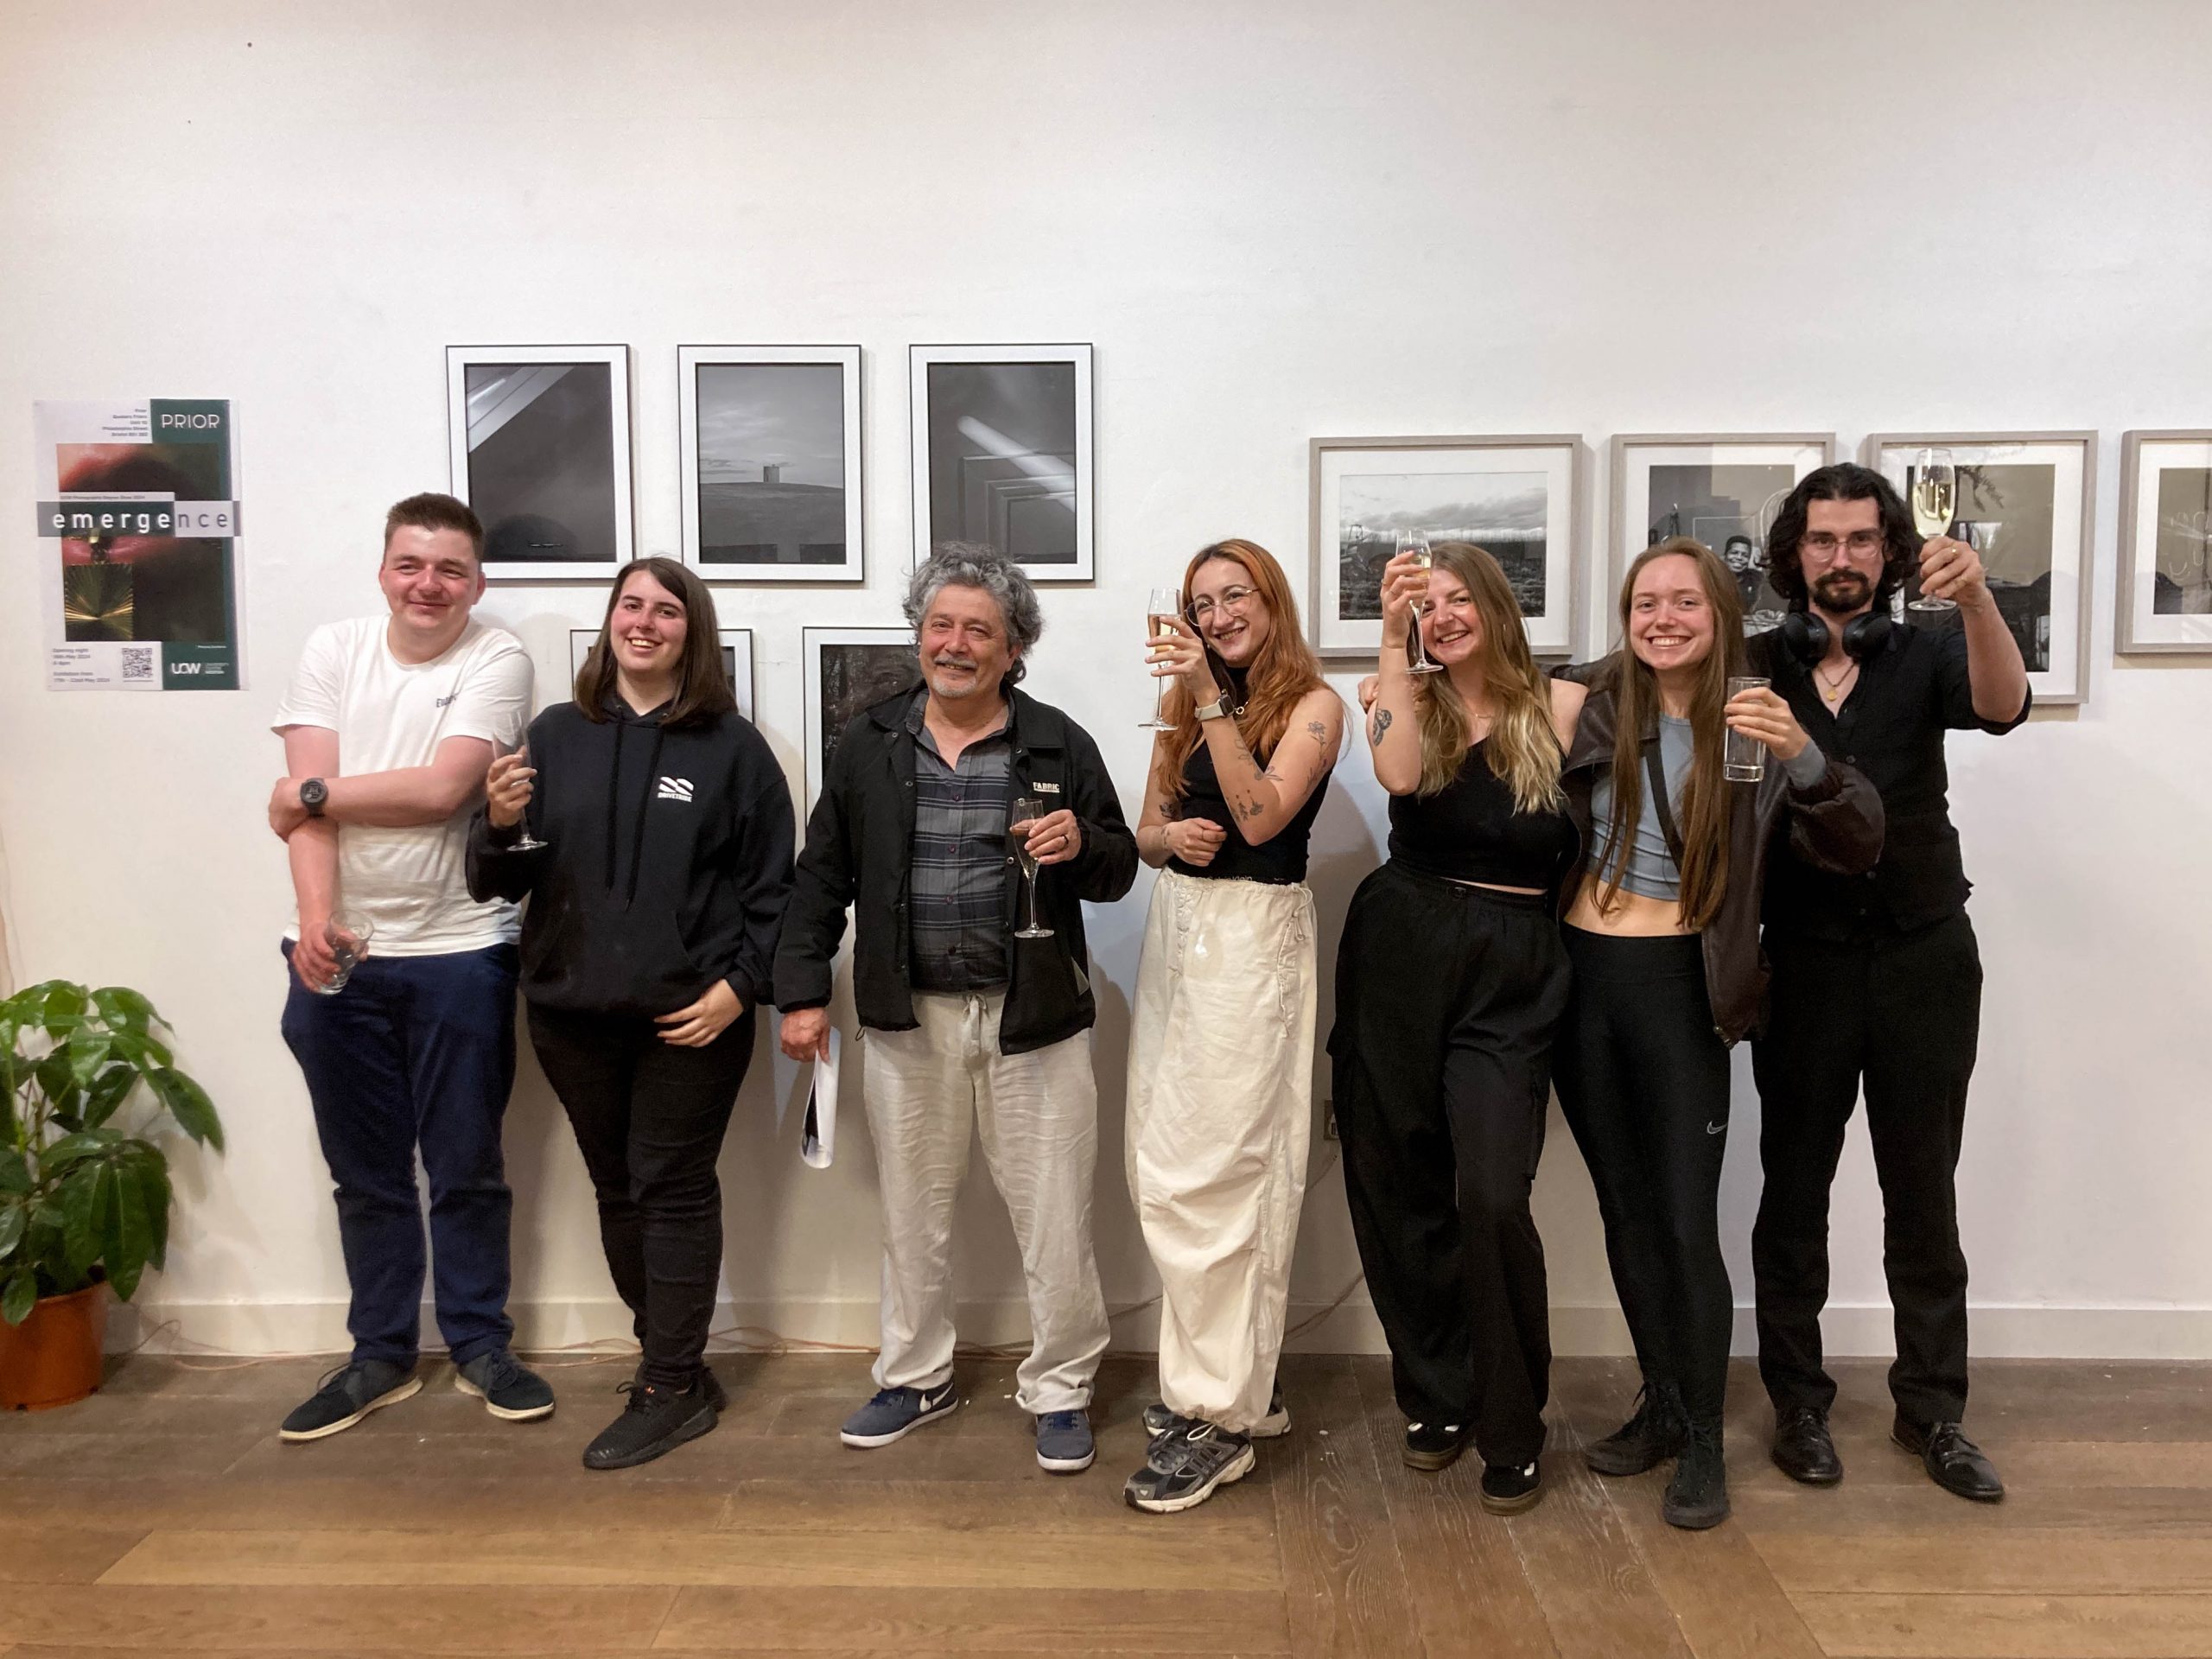 our level 6 FILM AND MEDIA ARTS PRODUCTION students posing for a picture at their photography exhibition at Prior in Cabot Circus